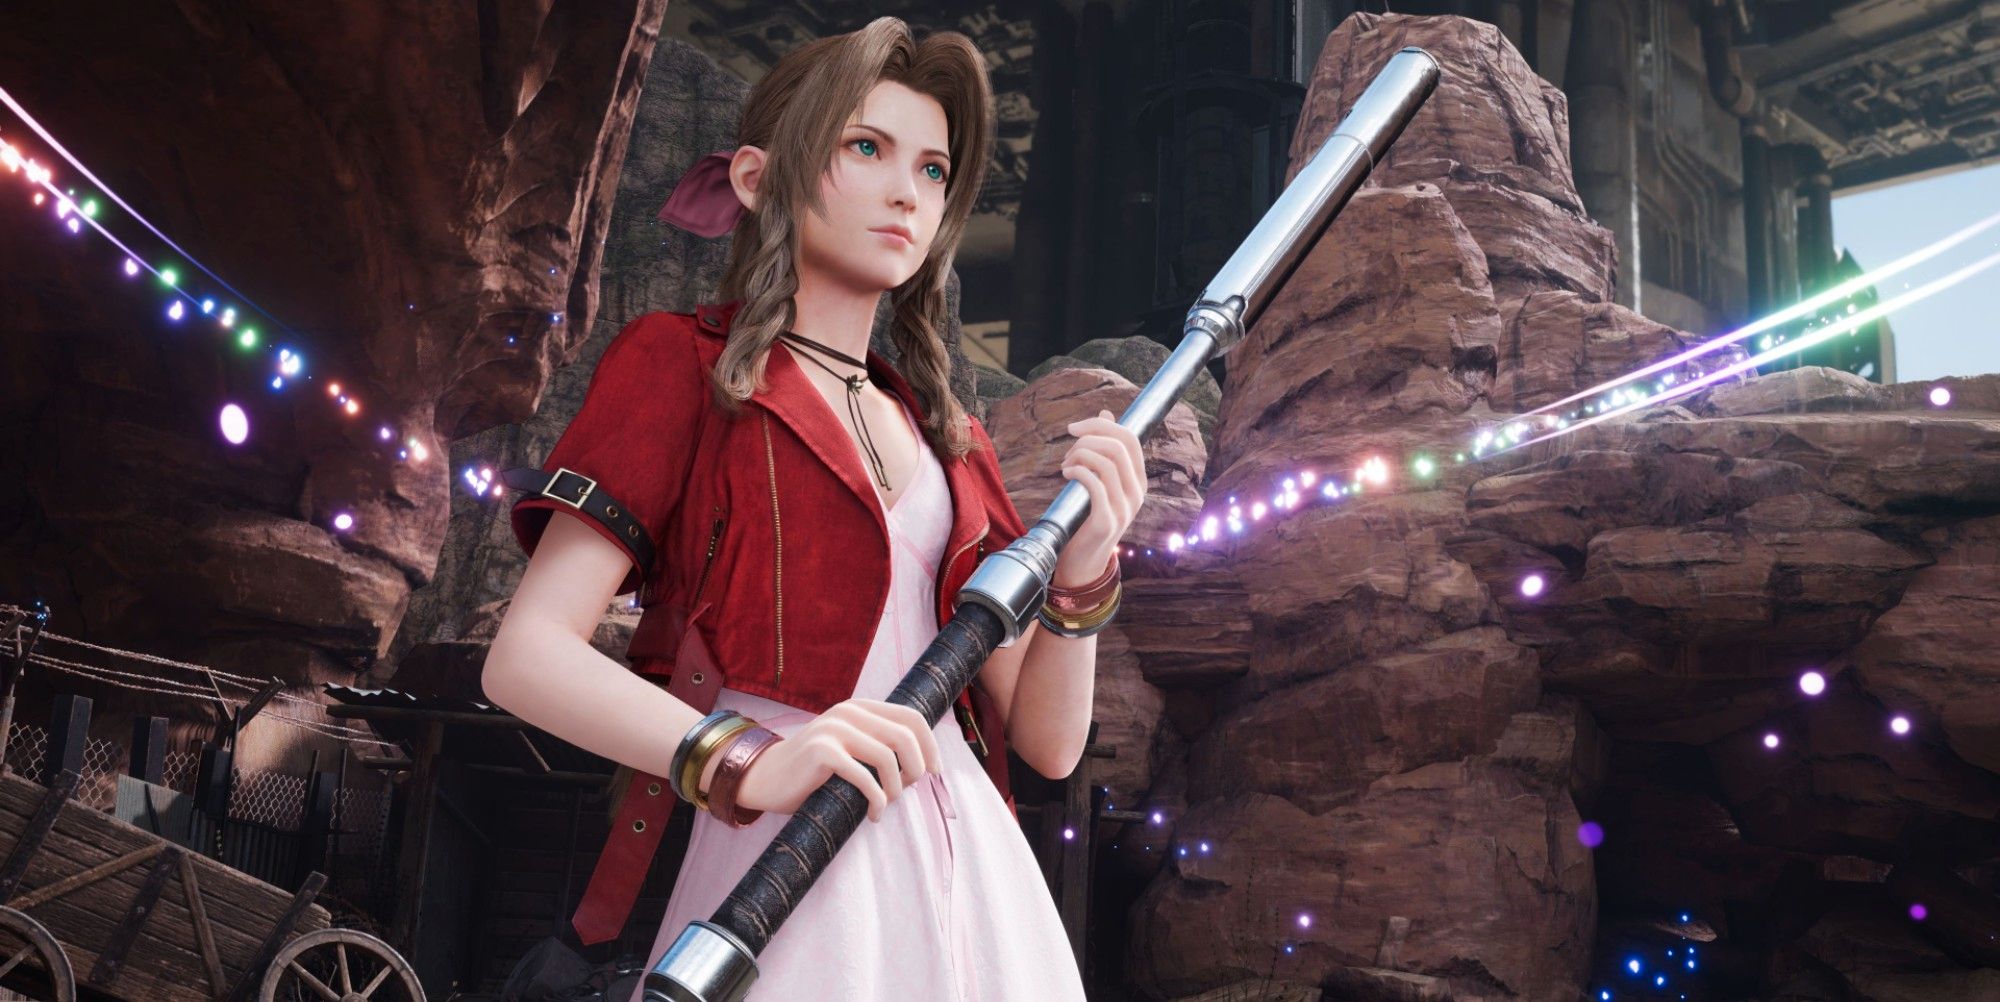 Final Fantasy 7 Remake Steam Page Suggests End Of Epic Exclusivity